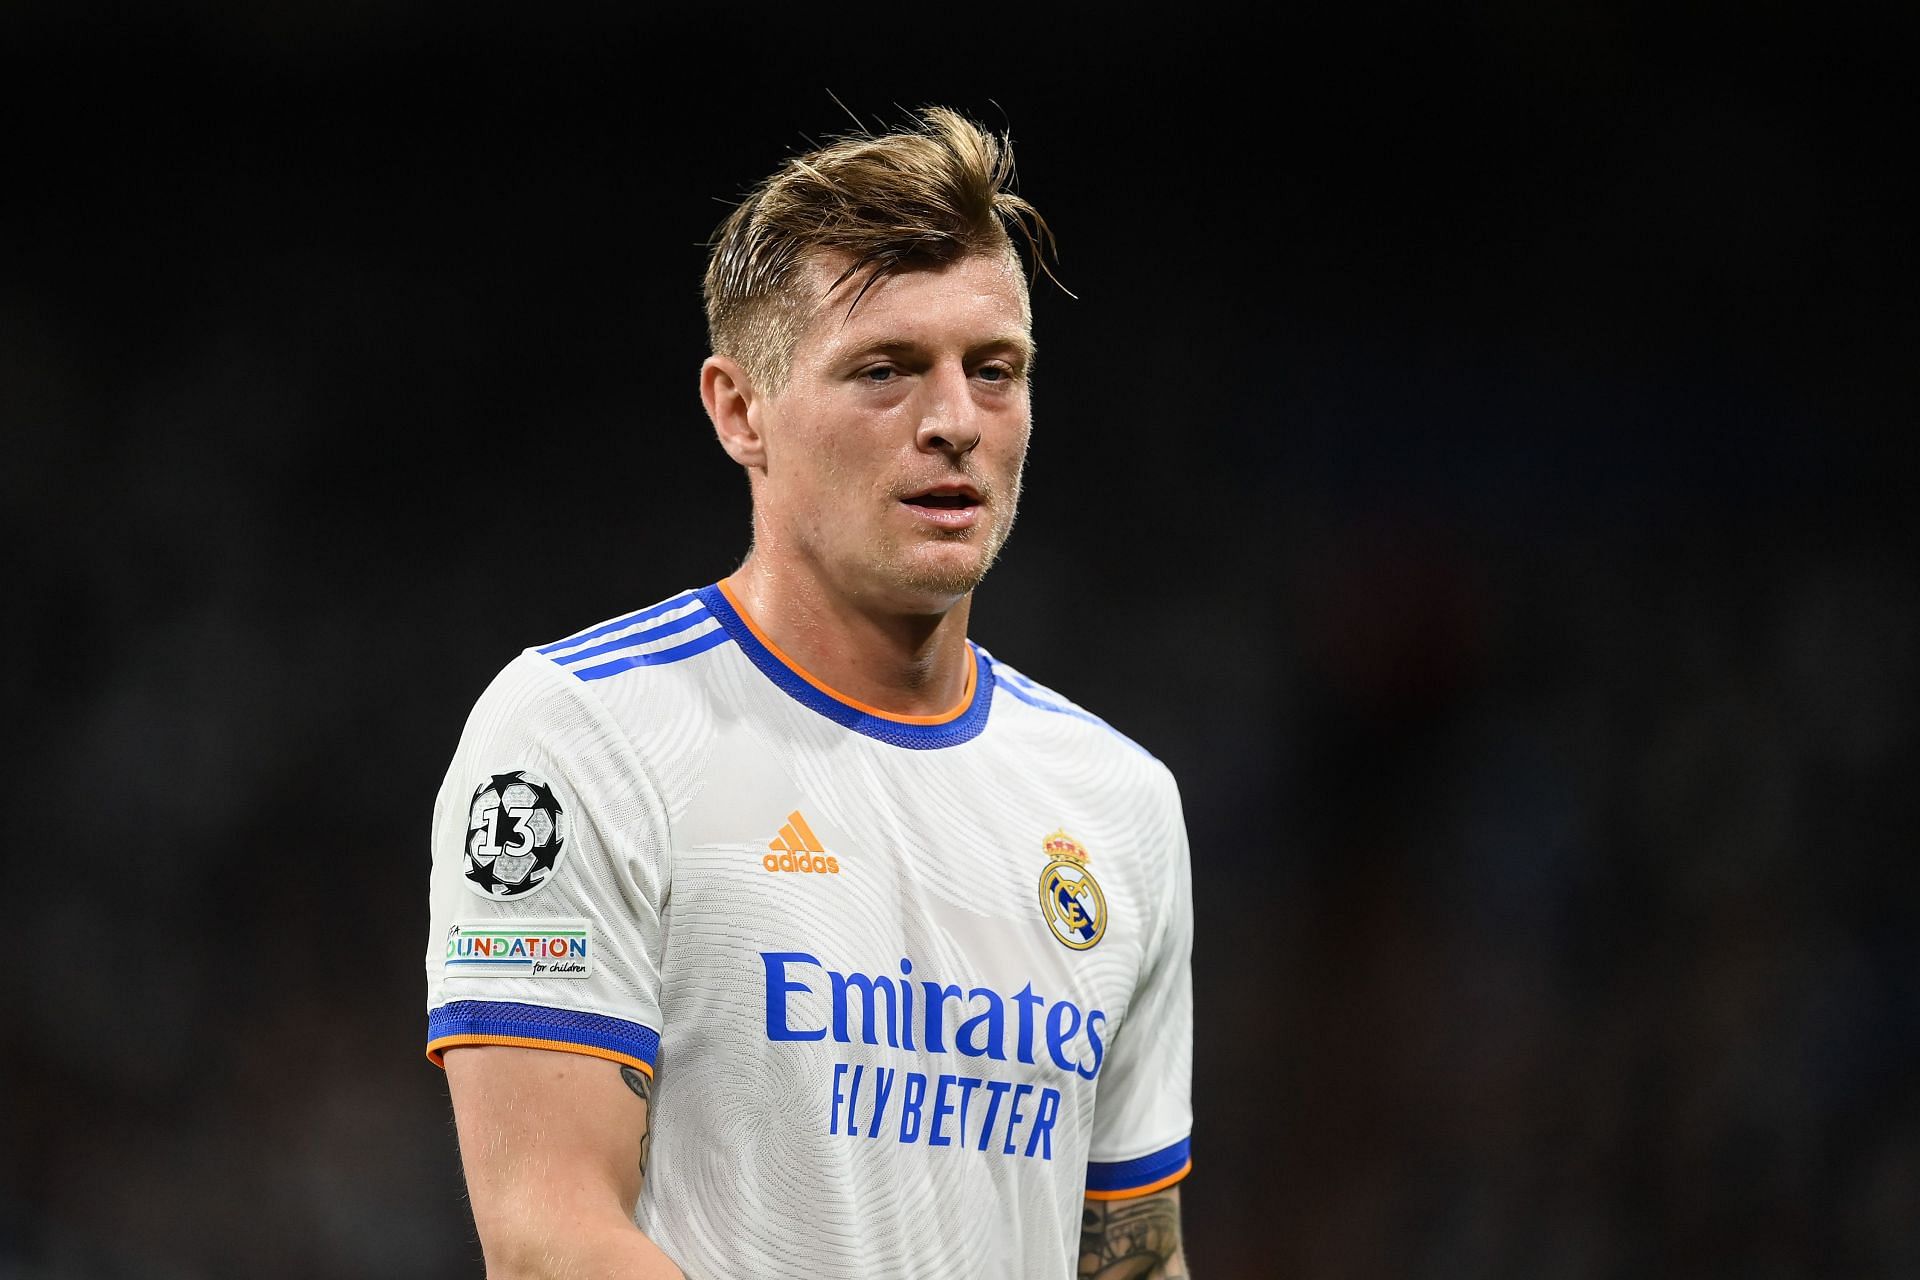 Toni Kroos helped his team earn a point on Tuesday.